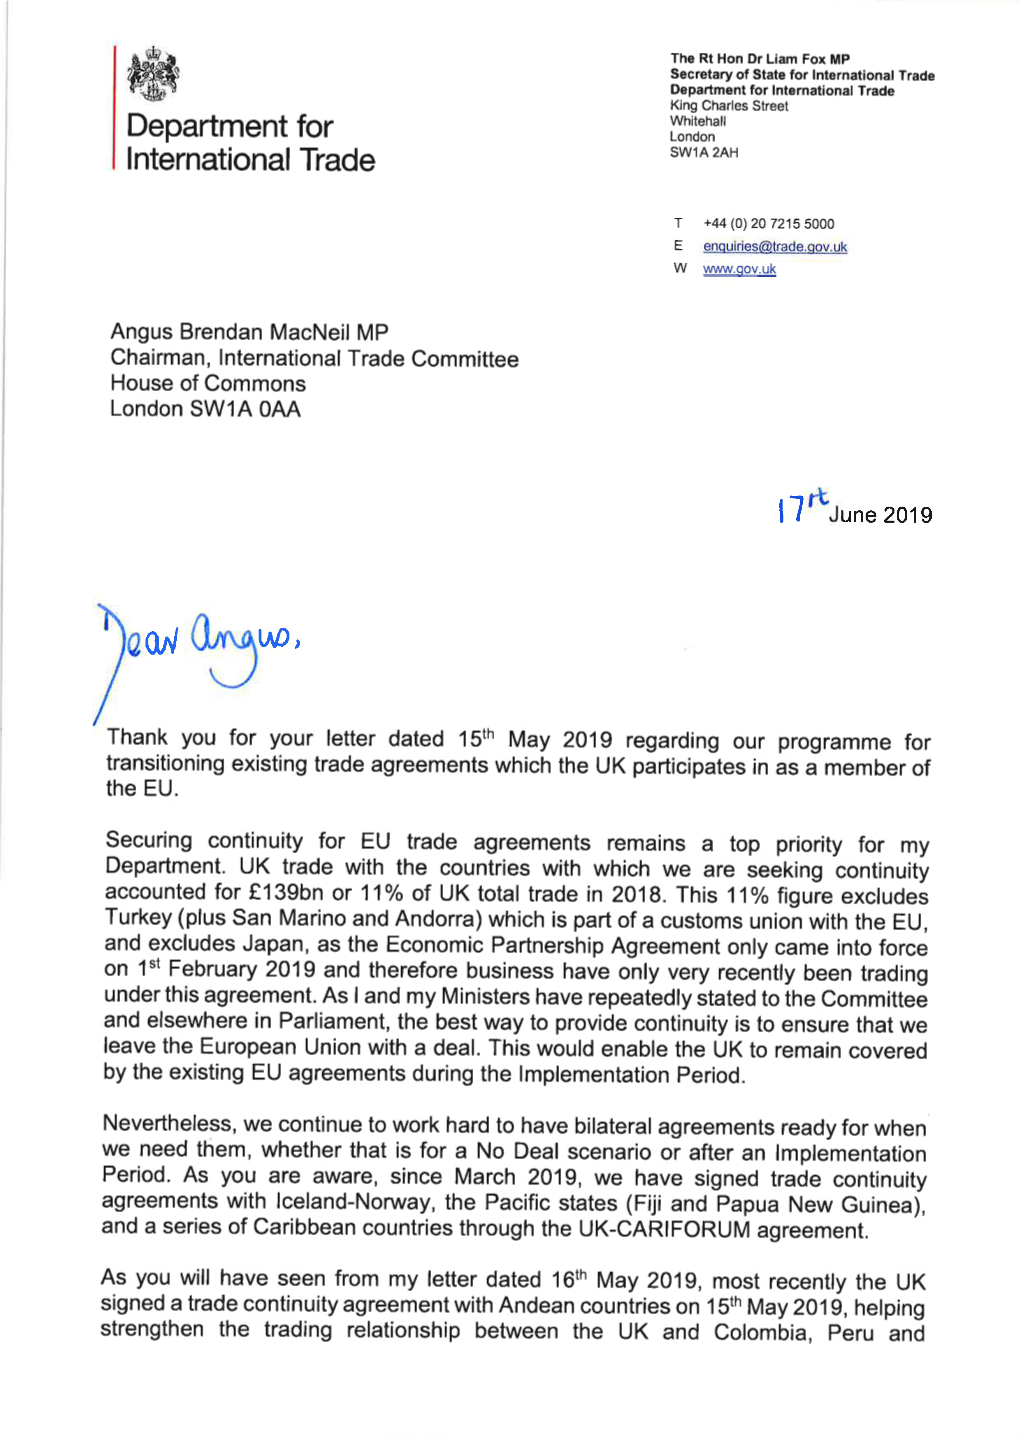 Letter Dated 15Th May 2019 Regarding Our Programme for Transitioning Existing Trade Agreements Which the UK Participates in As a Member of the EU